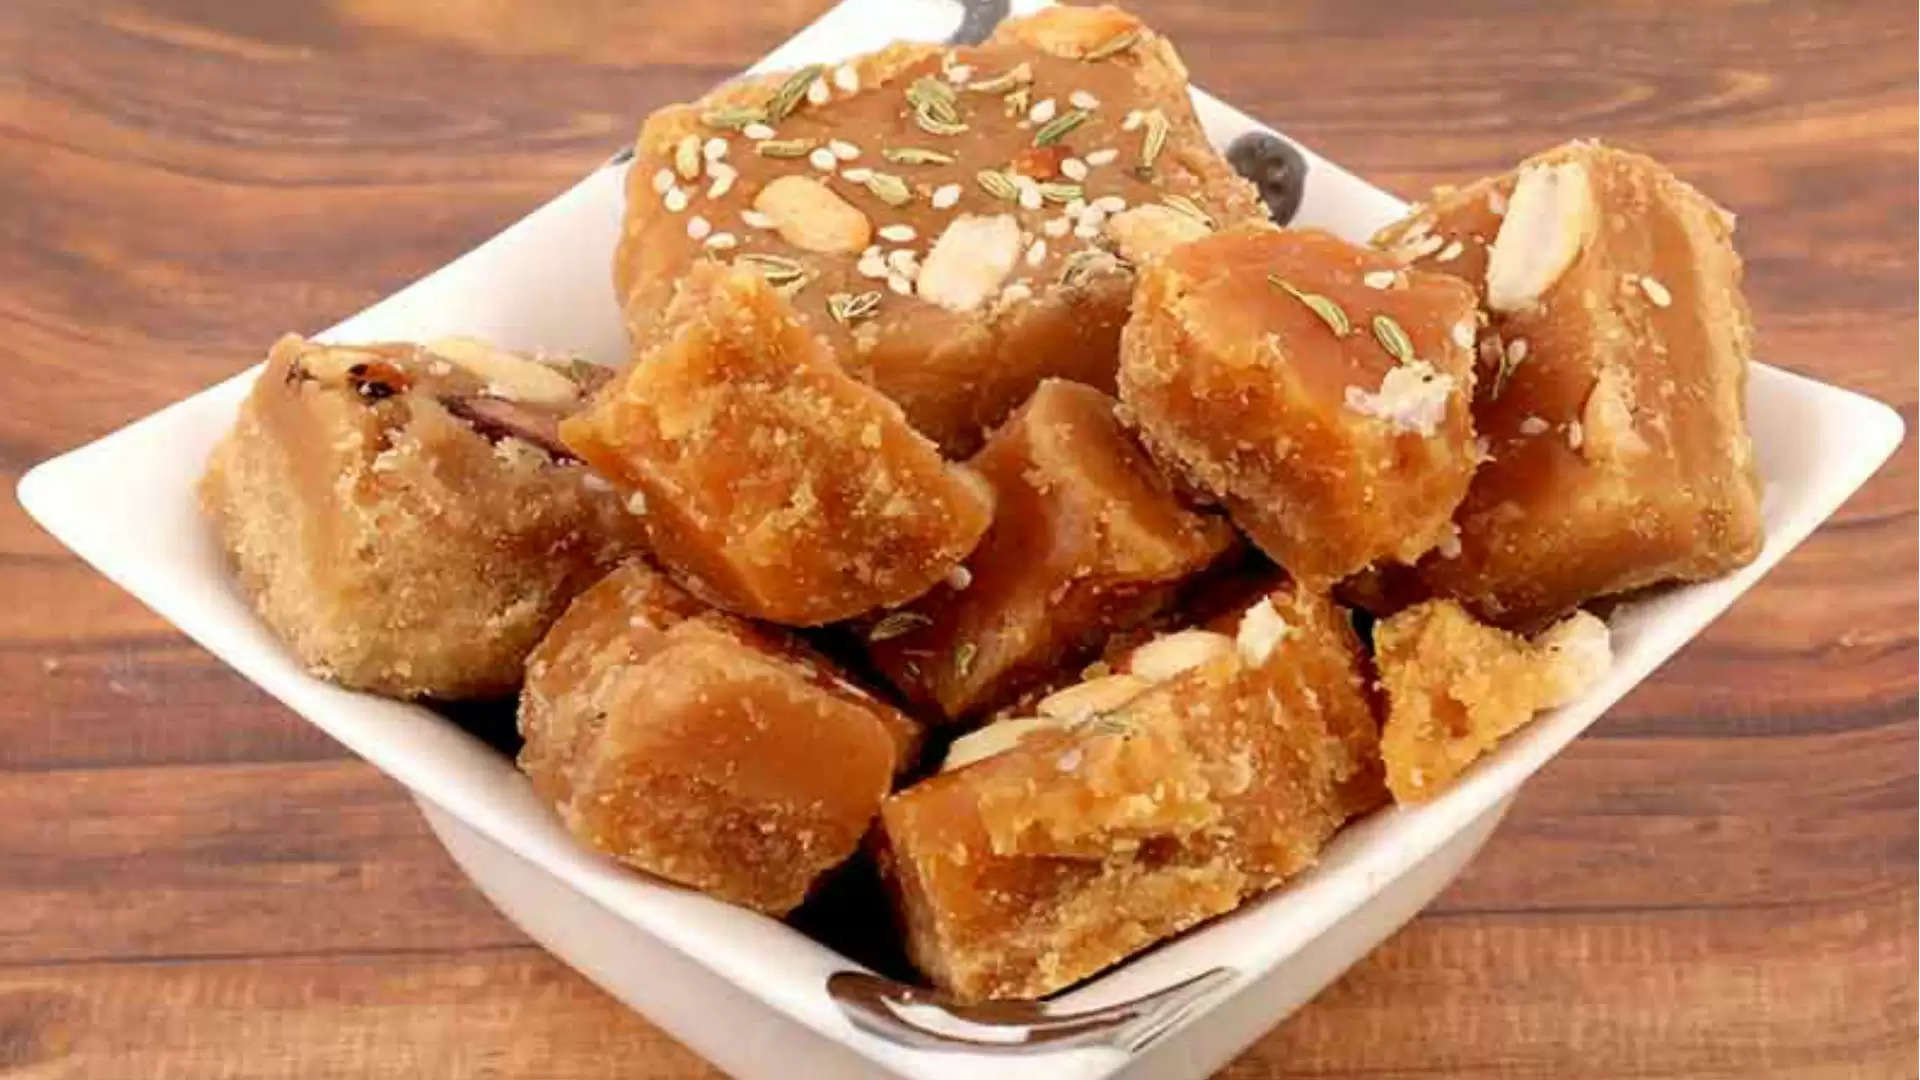 Jaggery remedies for money and wealth 